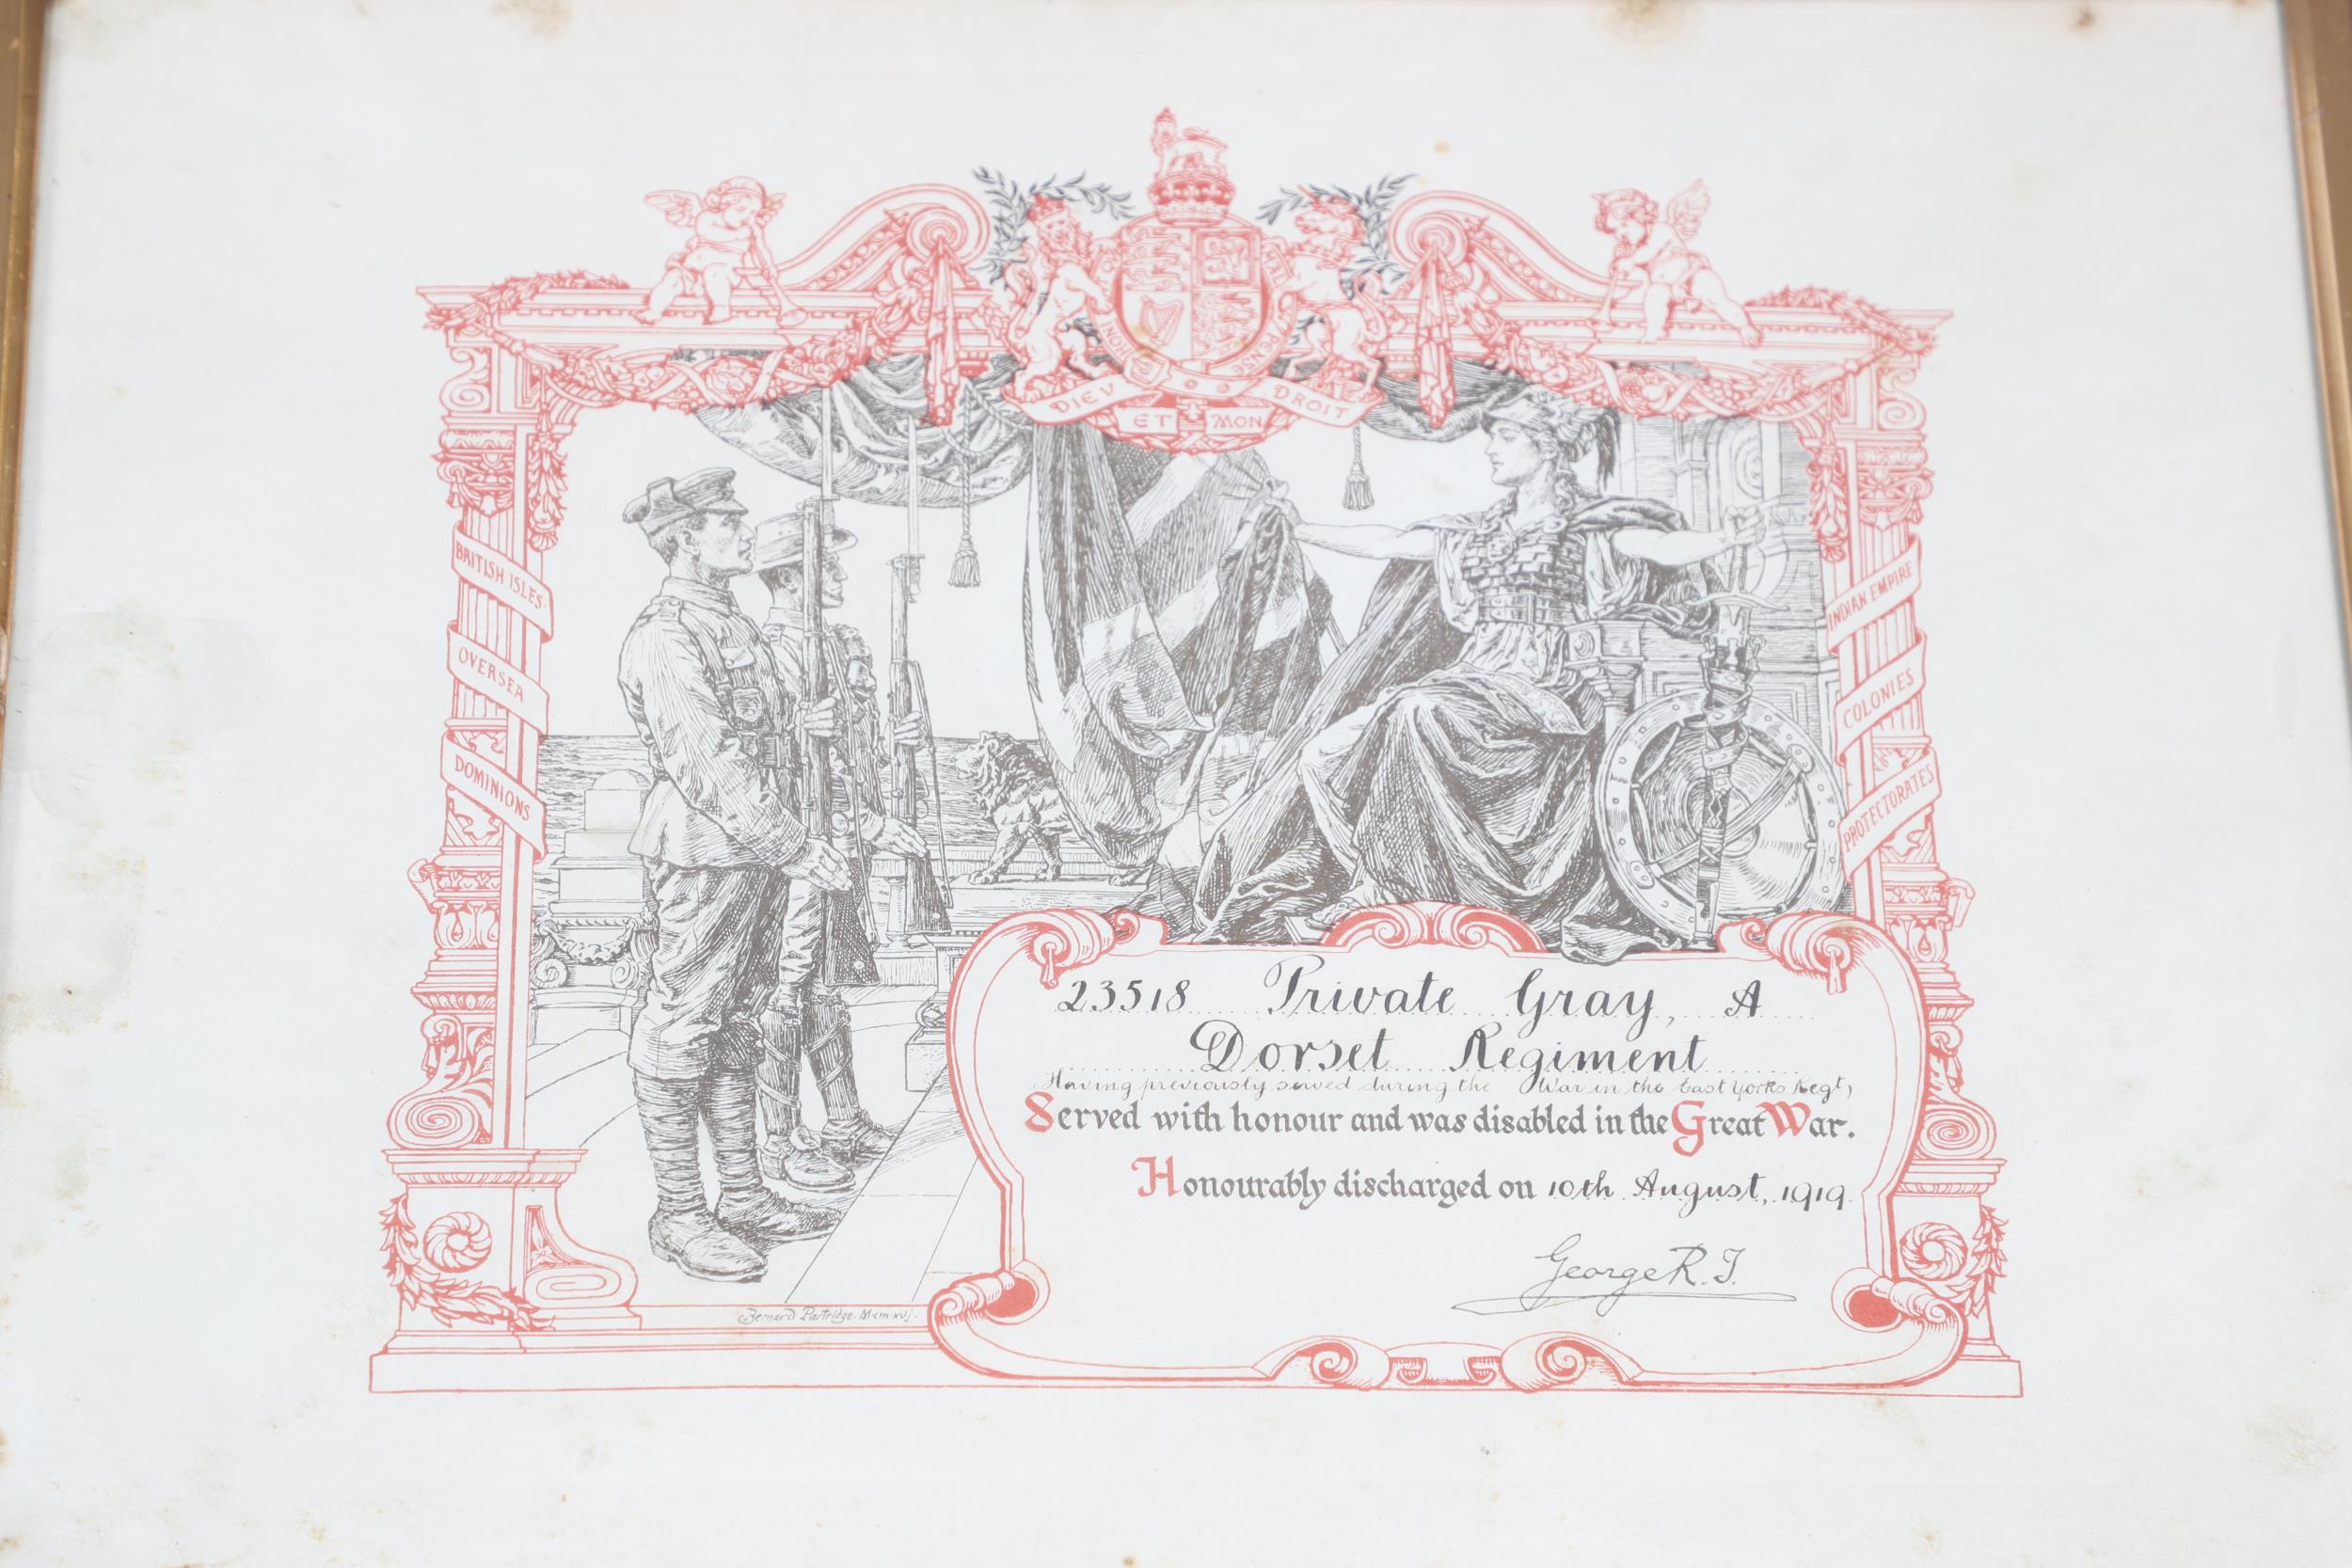 THREE FIRST WORLD HONOURABLE DISCHARGE CERTIFICATES. - Image 3 of 10